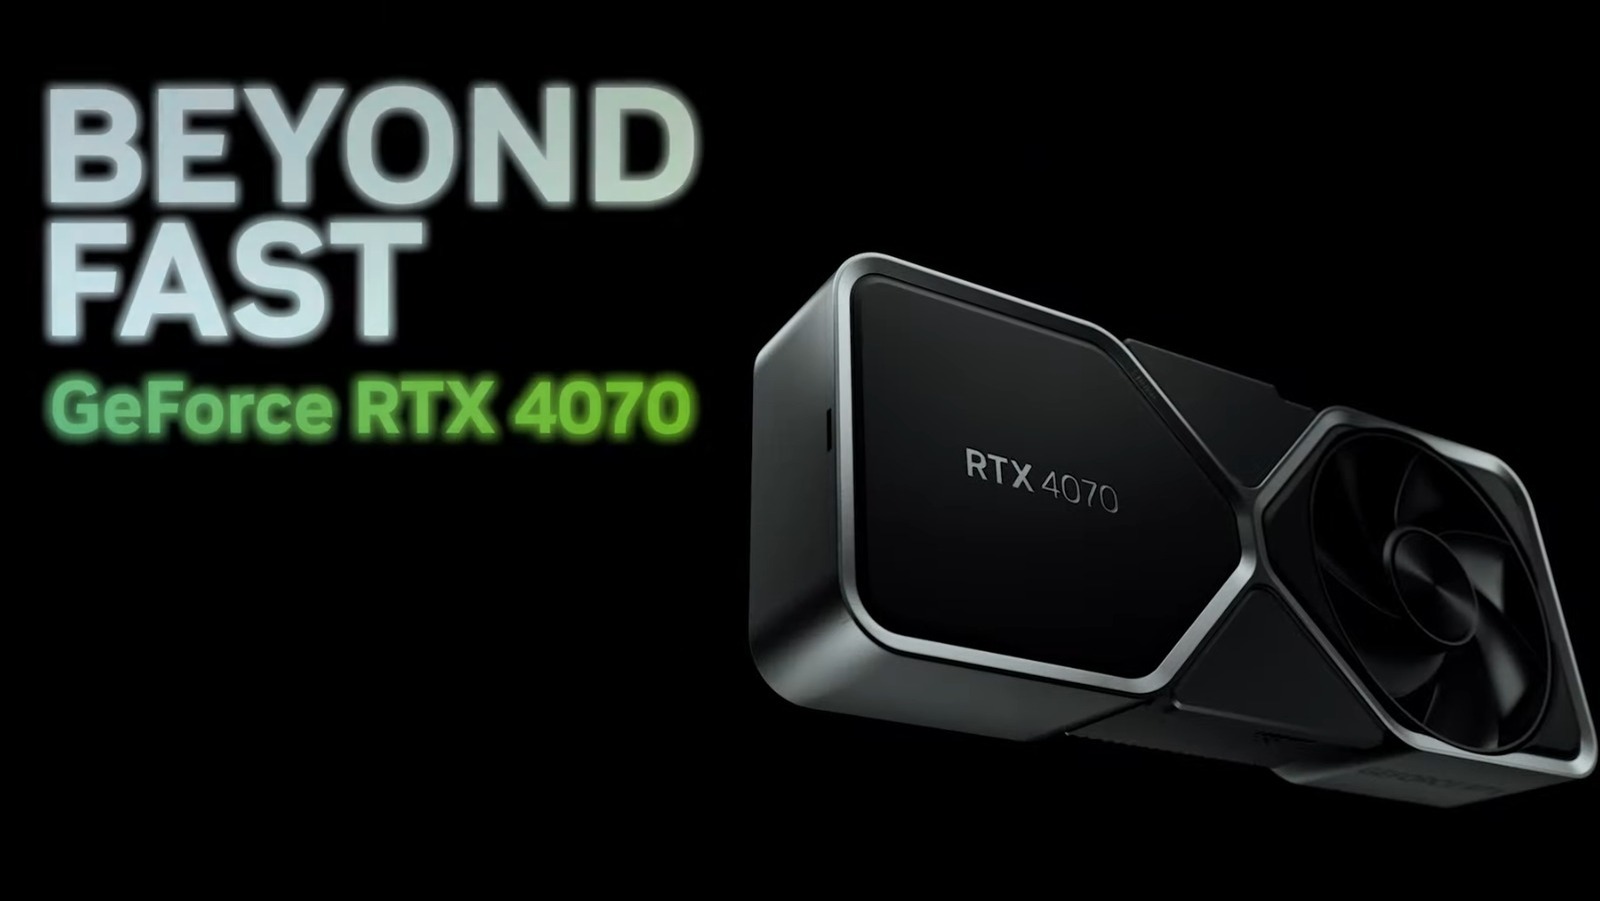 RTX 4070 vs RX 6800XT, Test in 13 Games at 1440p